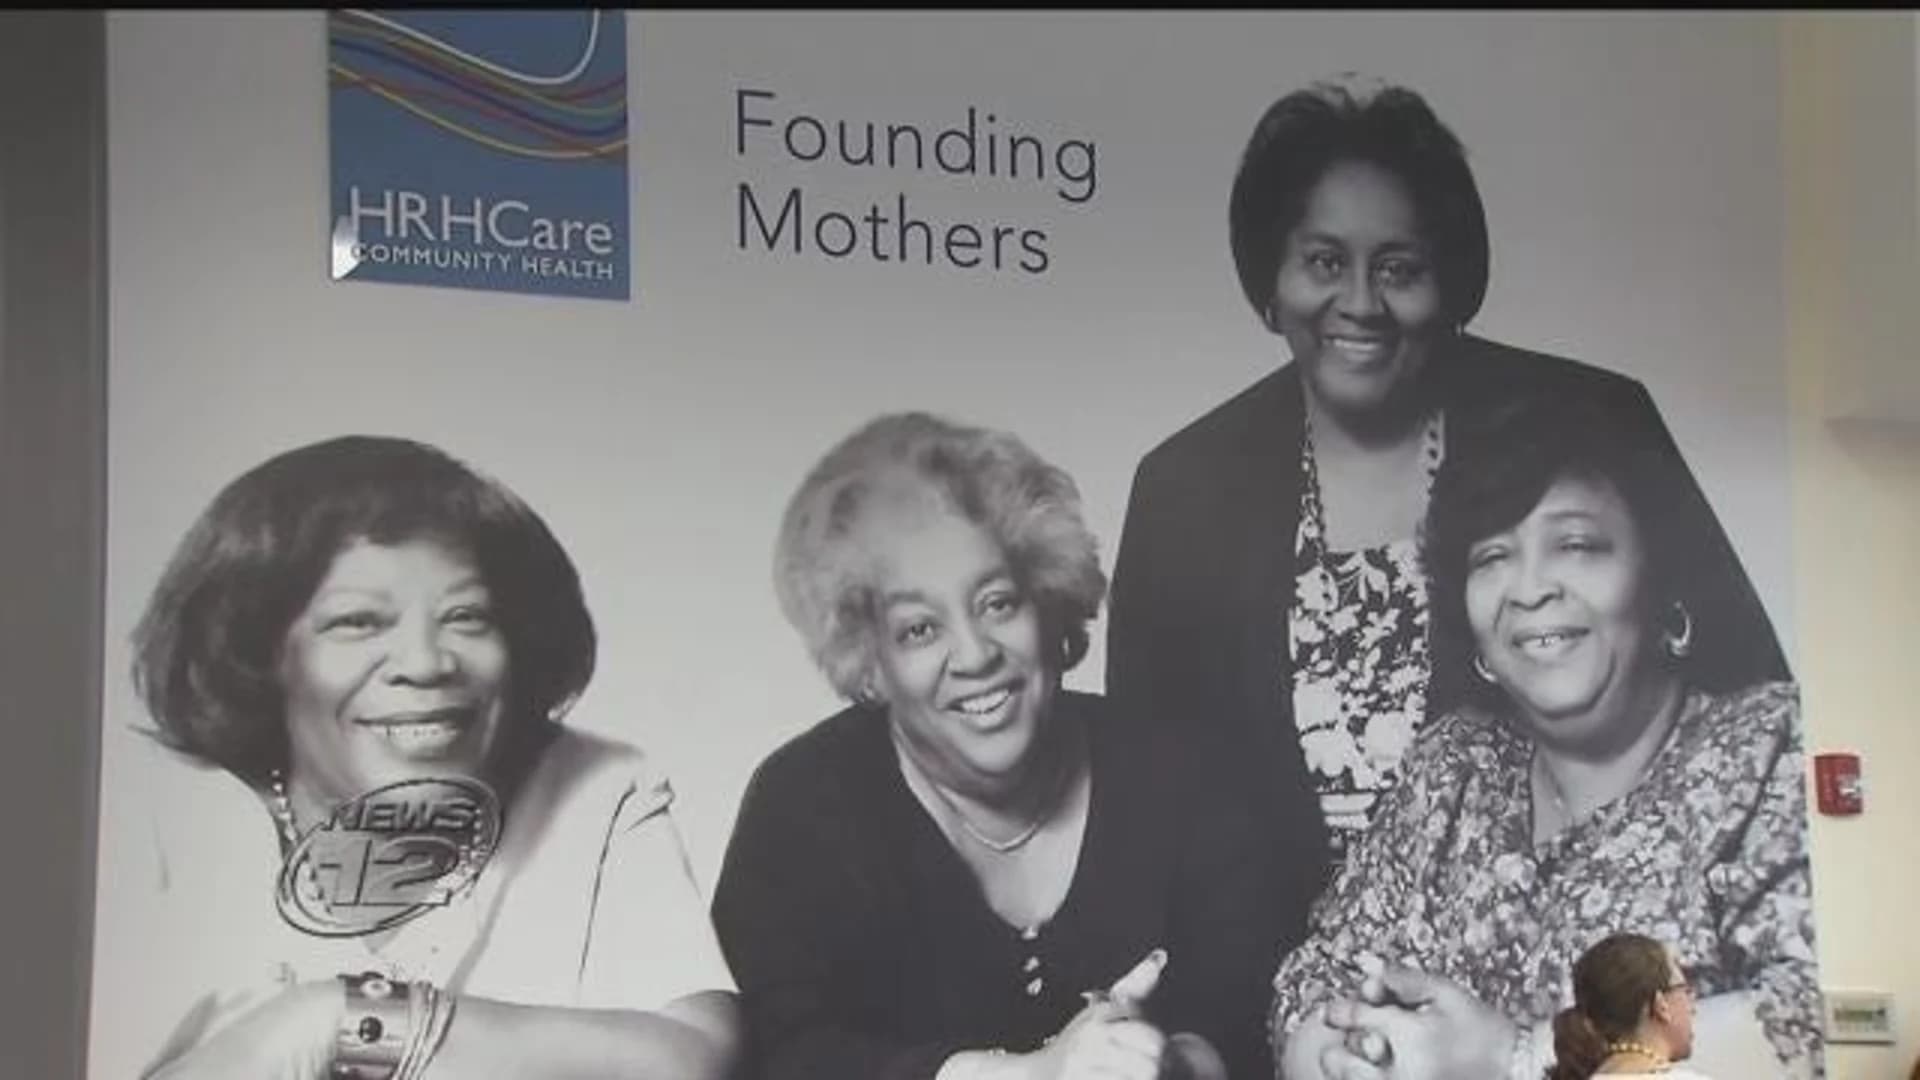 'Founding Mothers' honored at Peekskill health center